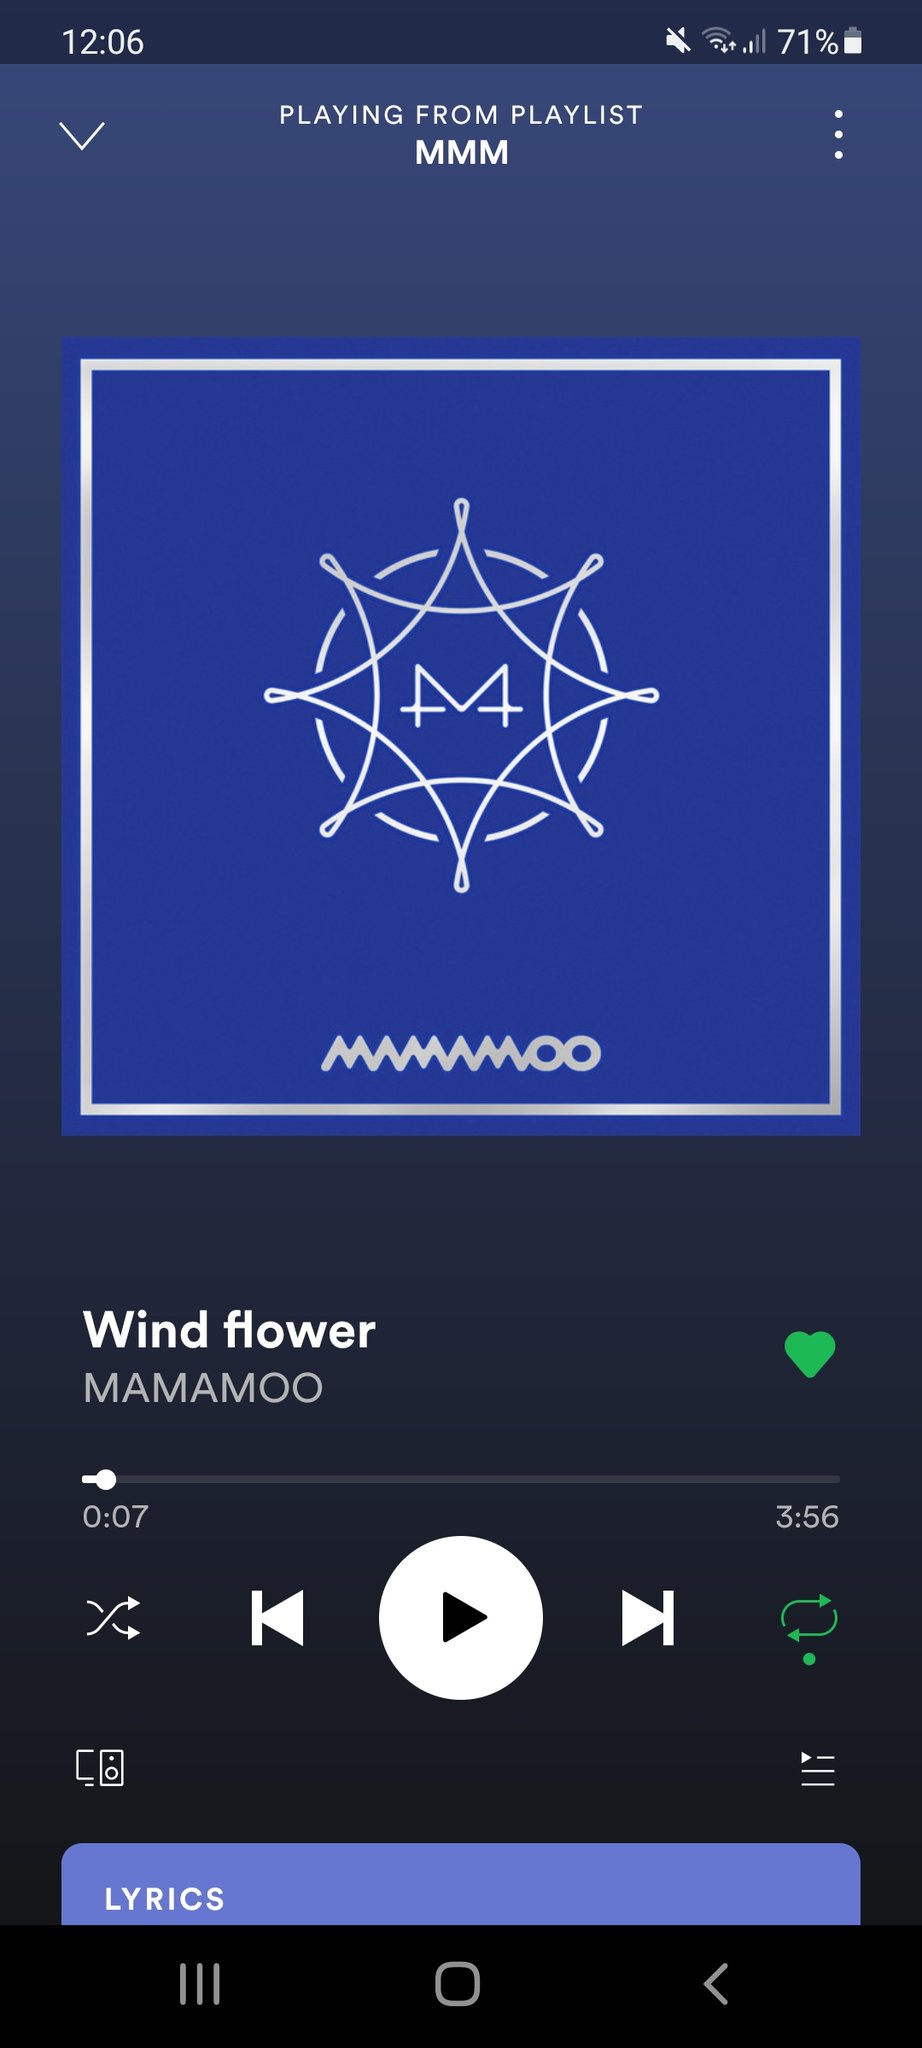 El All Seoul S Street Updates Every Weekend On Twitter Windflower Is One Of The Few Mamamoo Songs Left On Spotify Watch Me Keep This On Loop Until They Pry It Away